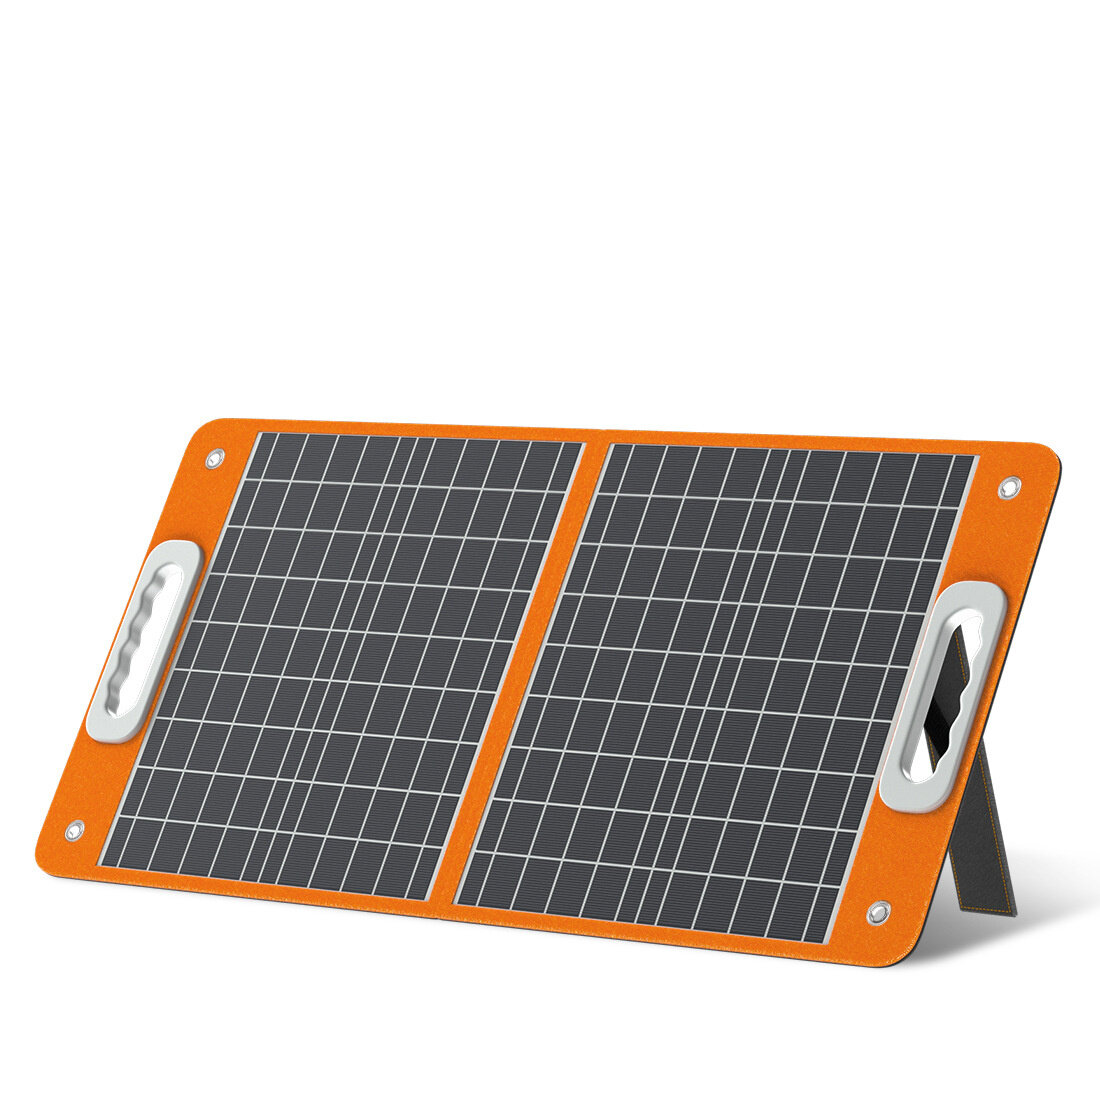 [US Direct] FlashFish 18V 60W Foldable Solar Panel Portable Solar Charger with DC Output USB-C QC3.0 for Phones Tablets Camping Van RV Trip COD